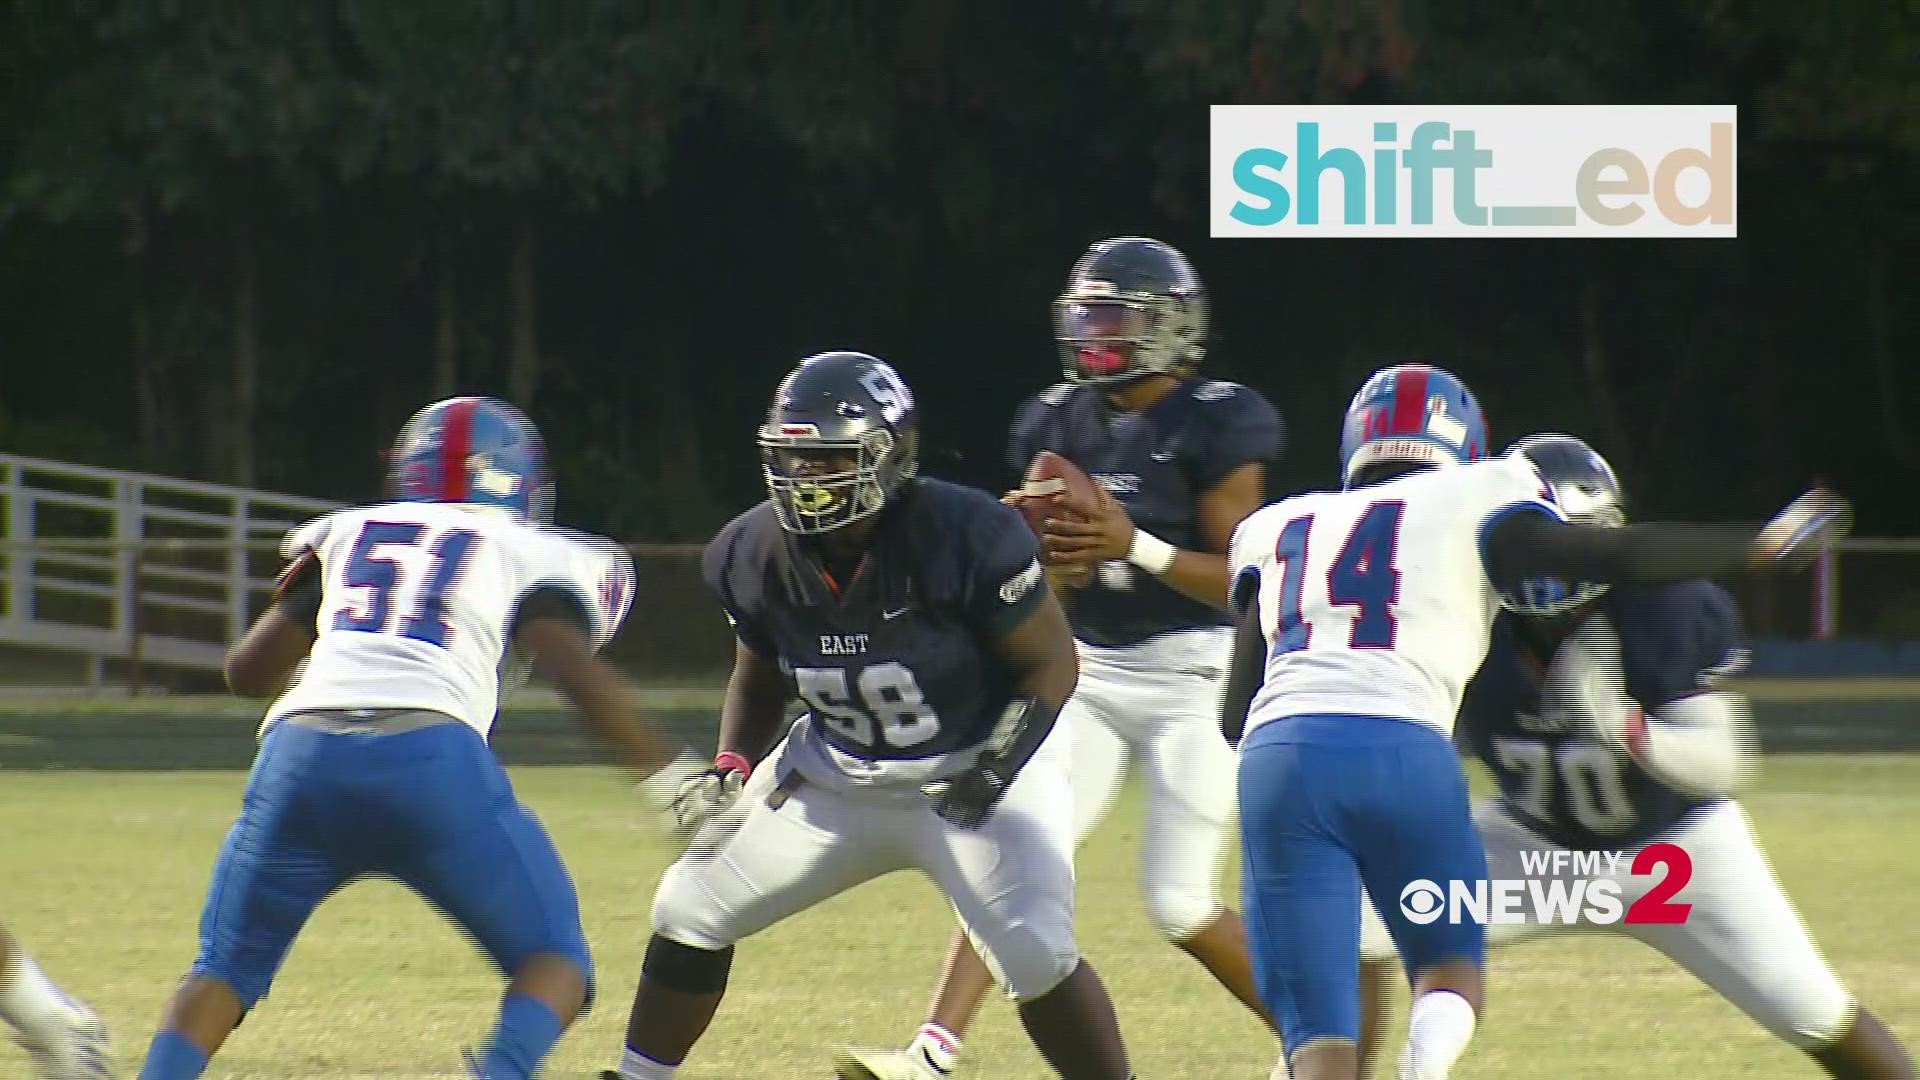 East Forsyth's Que Brown and North Forsyth's Jacob Patterson came up with big plays for our Co-Plays of the Week.